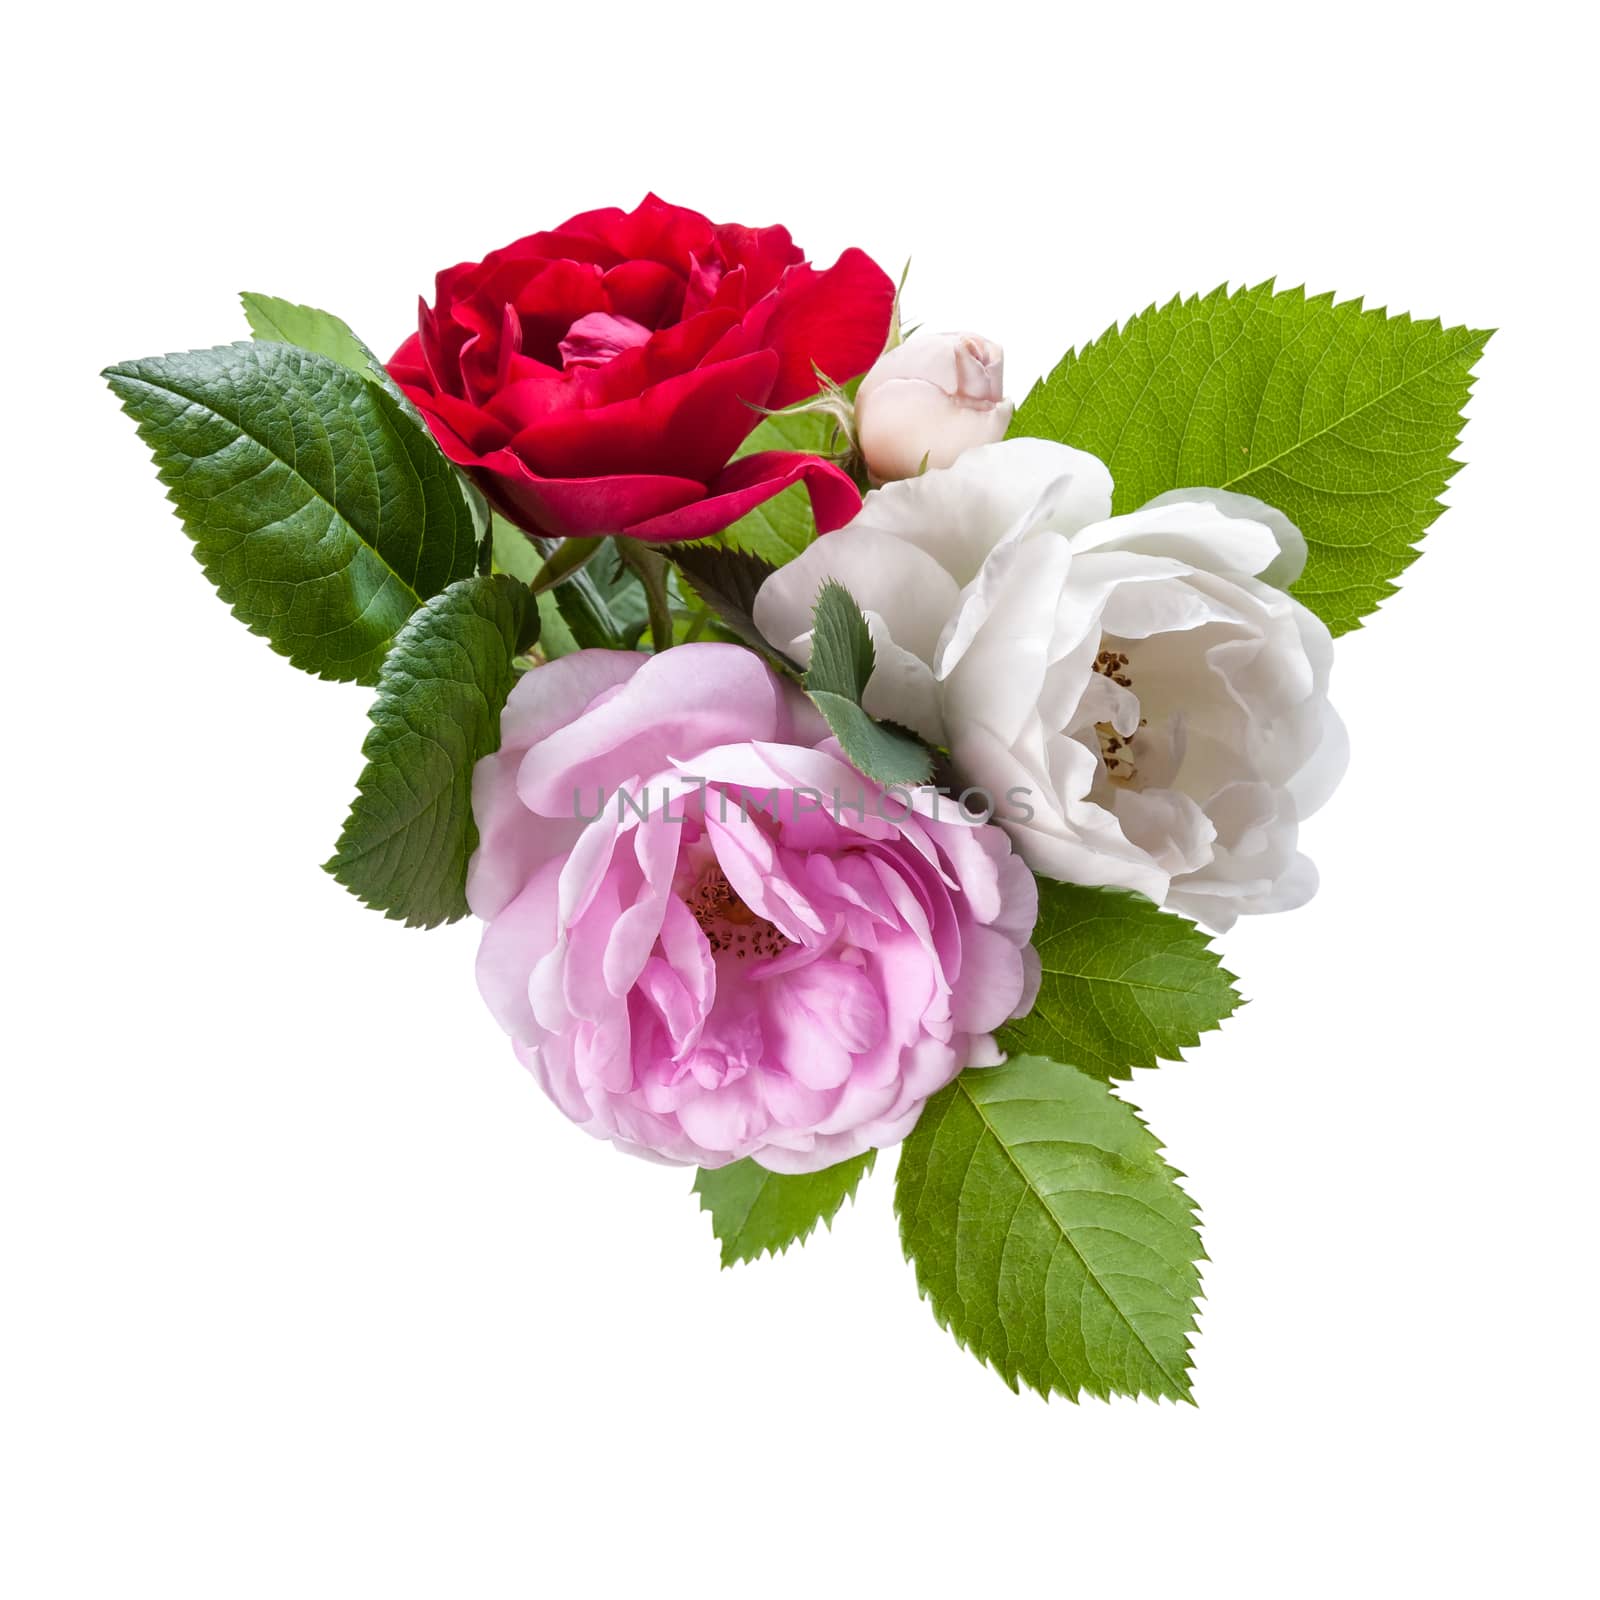 Red, white and pink rose flowers with leaves, isolated on white backround